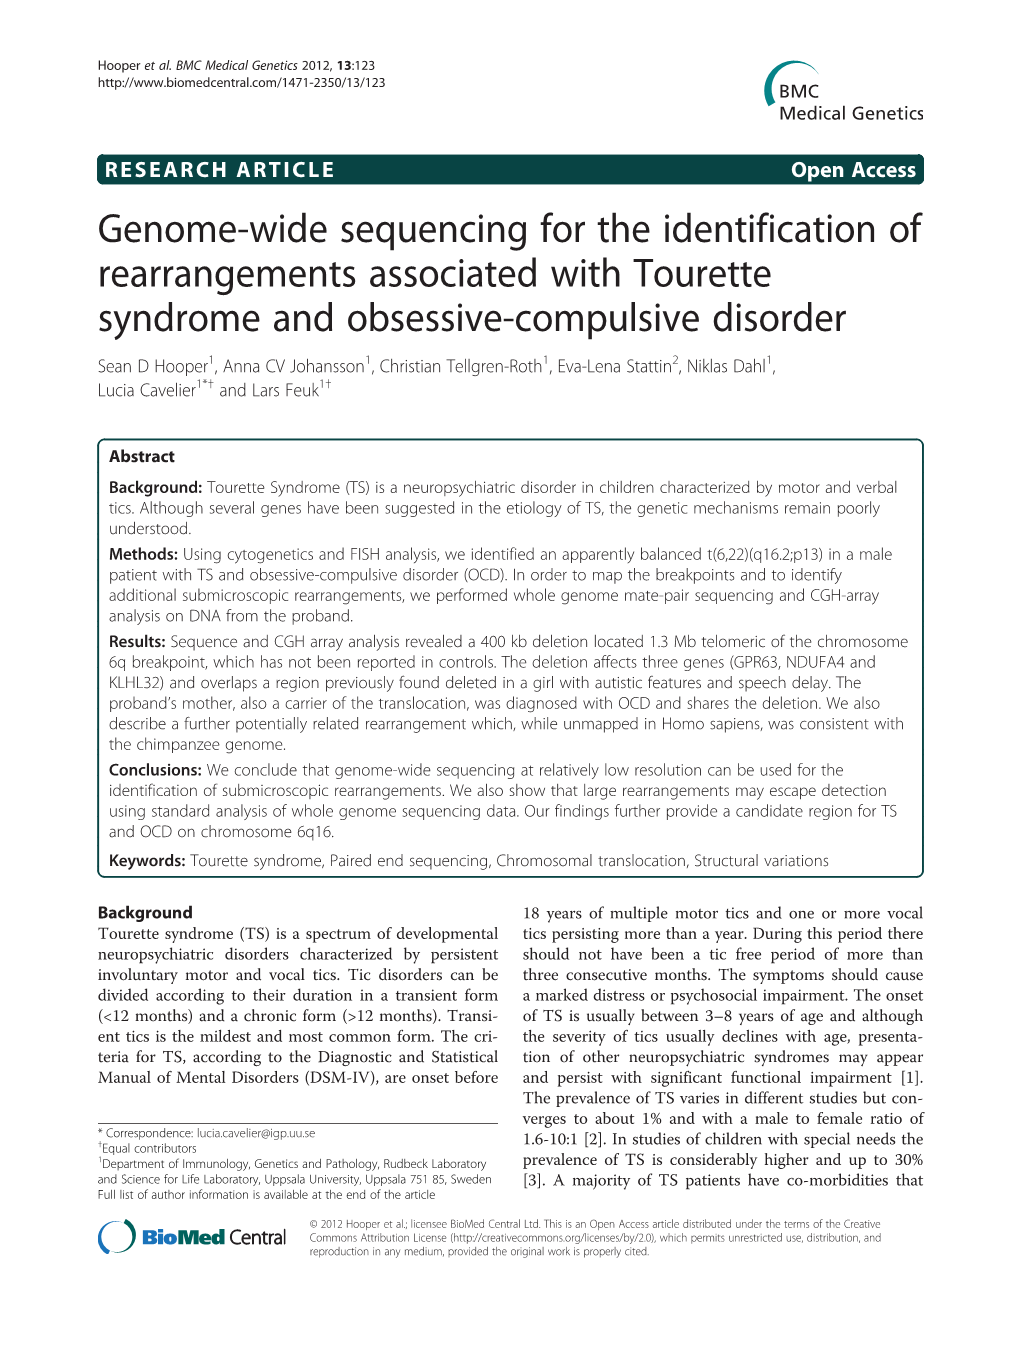 Genome-Wide Sequencing for the Identification of Rearrangements